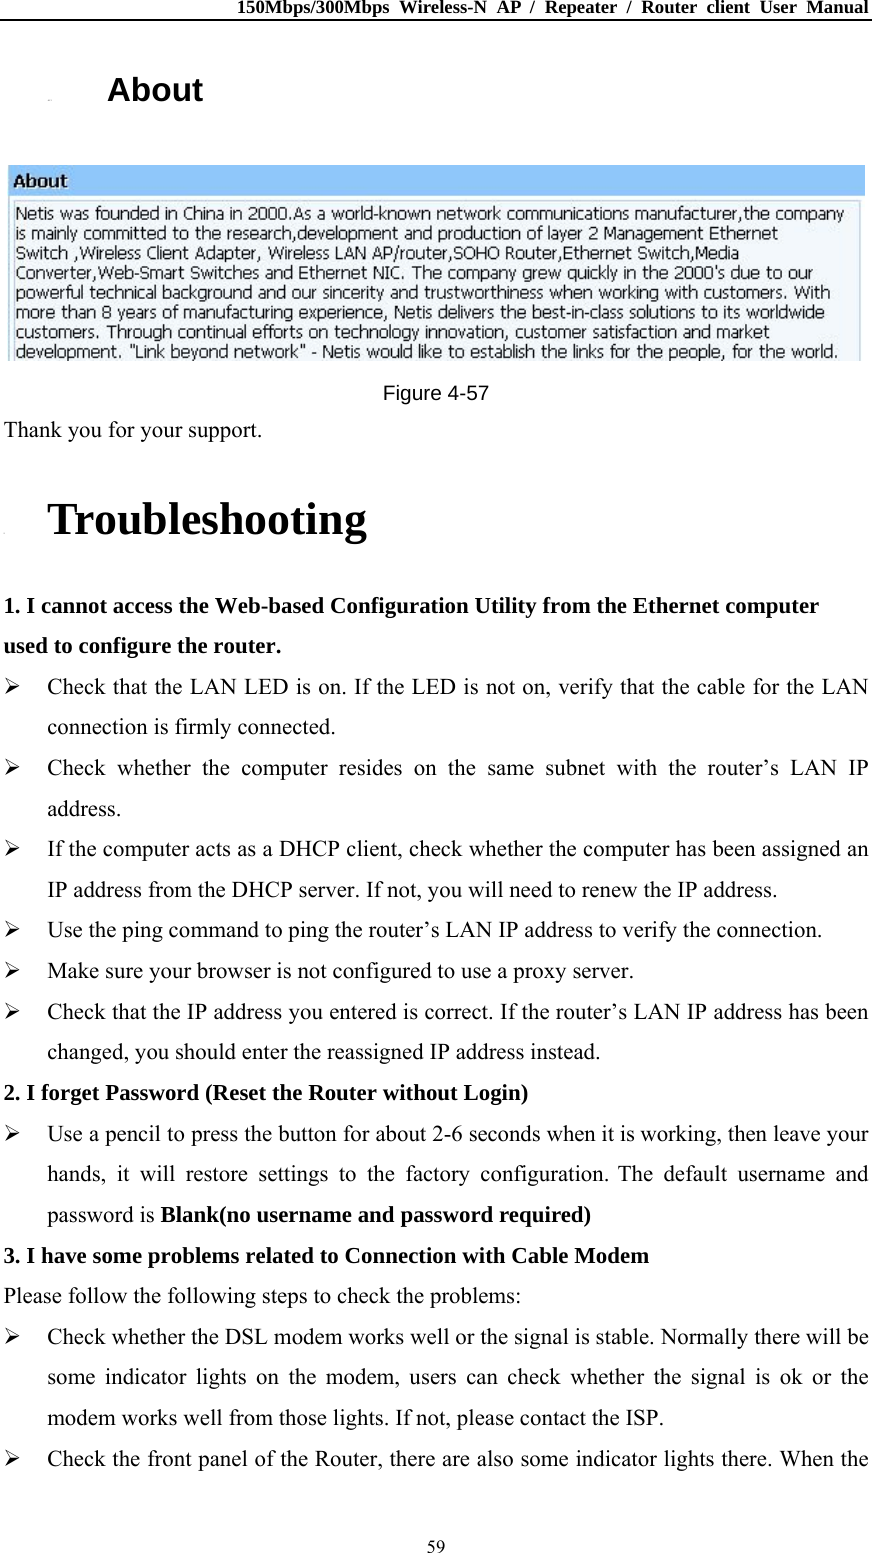 150Mbps/300Mbps Wireless-N AP / Repeater / Router client User Manual  594.13. About  Figure 4-57 Thank you for your support. 5. Troubleshooting 1. I cannot access the Web-based Configuration Utility from the Ethernet computer used to configure the router.  Check that the LAN LED is on. If the LED is not on, verify that the cable for the LAN connection is firmly connected.  Check whether the computer resides on the same subnet with the router’s LAN IP address.  If the computer acts as a DHCP client, check whether the computer has been assigned an IP address from the DHCP server. If not, you will need to renew the IP address.    Use the ping command to ping the router’s LAN IP address to verify the connection.  Make sure your browser is not configured to use a proxy server.  Check that the IP address you entered is correct. If the router’s LAN IP address has been changed, you should enter the reassigned IP address instead. 2. I forget Password (Reset the Router without Login)  Use a pencil to press the button for about 2-6 seconds when it is working, then leave your hands, it will restore settings to the factory configuration. The default username and password is Blank(no username and password required) 3. I have some problems related to Connection with Cable Modem Please follow the following steps to check the problems:  Check whether the DSL modem works well or the signal is stable. Normally there will be some indicator lights on the modem, users can check whether the signal is ok or the modem works well from those lights. If not, please contact the ISP.  Check the front panel of the Router, there are also some indicator lights there. When the 